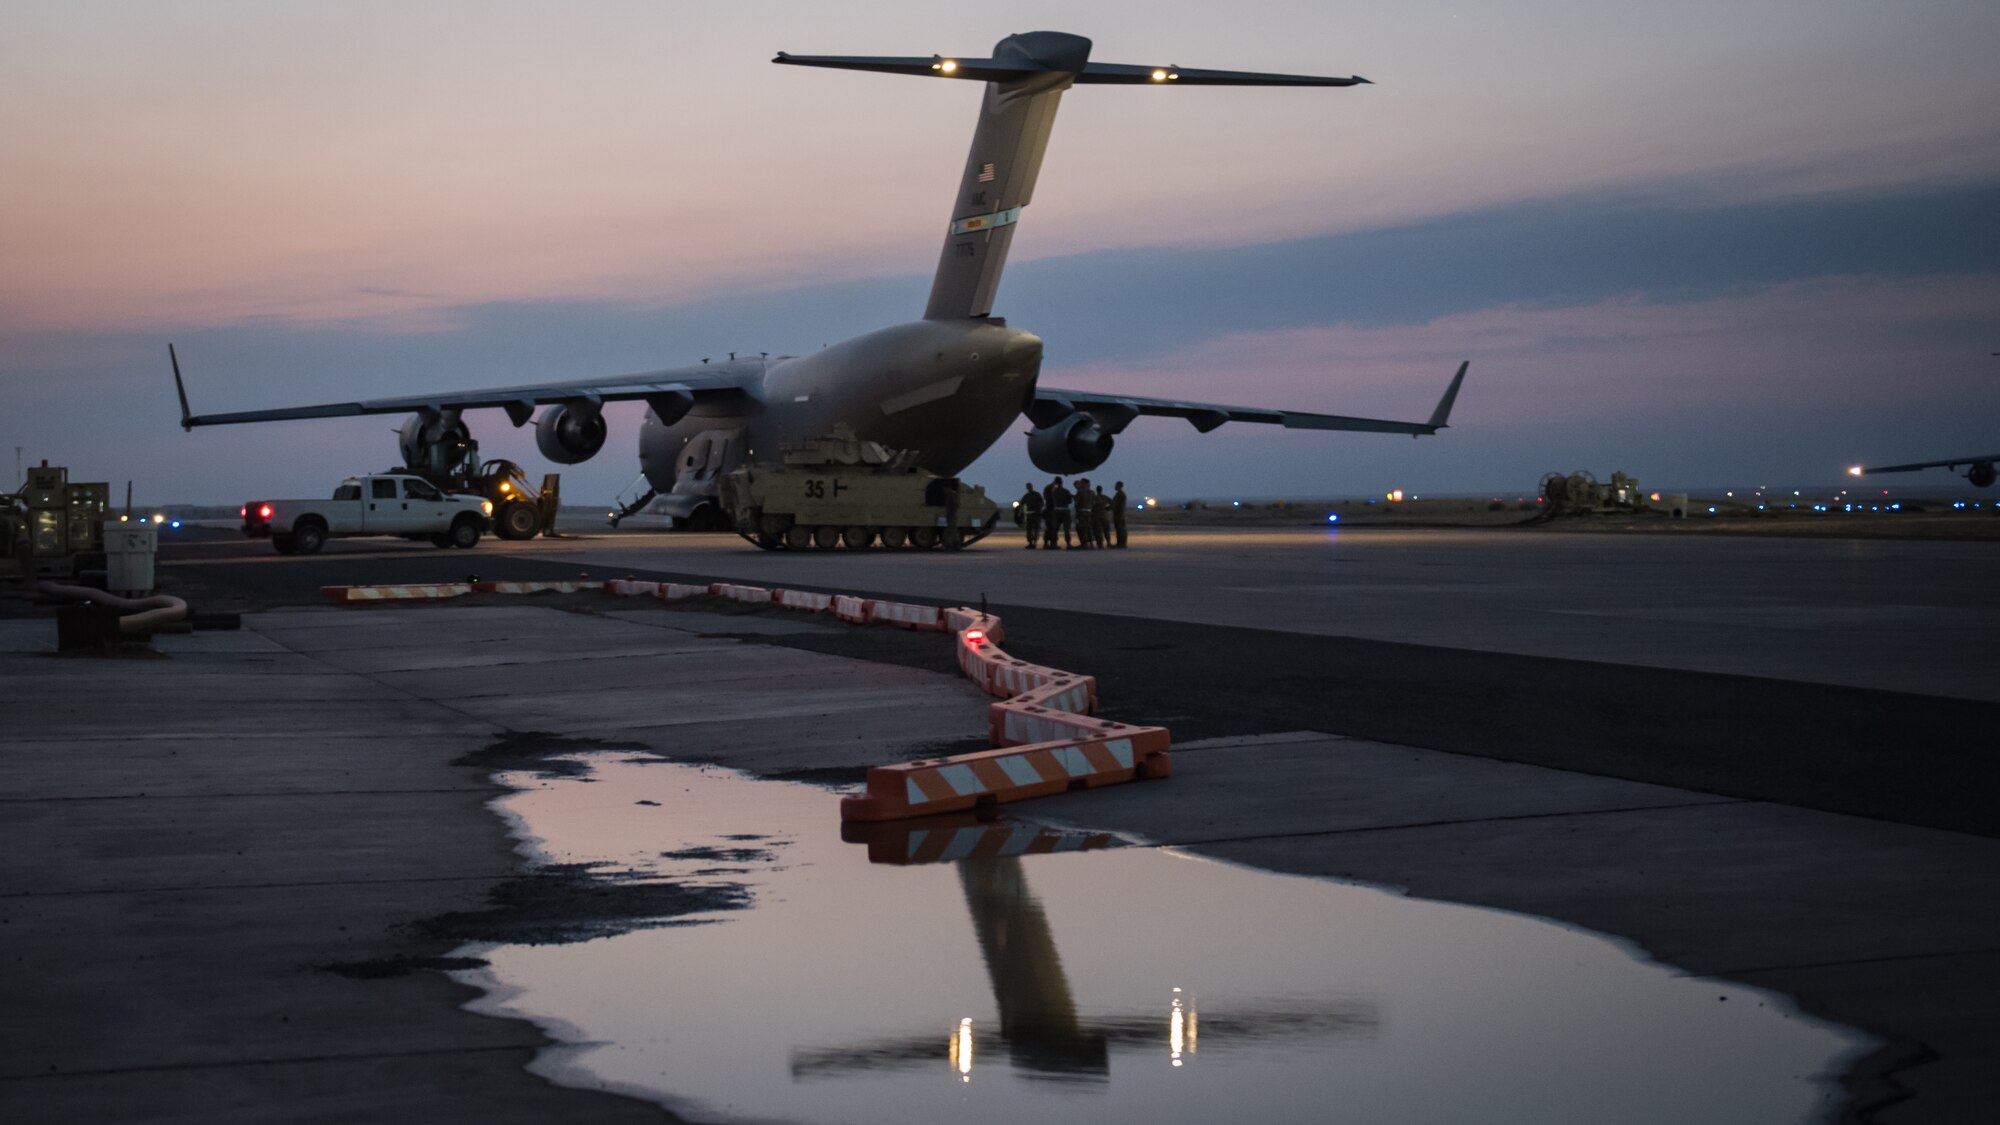 U.S. Airmen stand beside a U.S. Air Force C-17 Globemaster III in preparation to load a U.S. Army M2 Bradley Fighting Vehicle onto the aircraft at Ali Al Salem Air Base, Kuwait, Oct. 30, 2019. Airmen and Soldiers coordinated efforts to transport the BFV within the U.S. Central Command theater of operations to assist in ongoing efforts within the region. (U.S. Air Force photo by Tech. Sgt. Daniel Martinez)